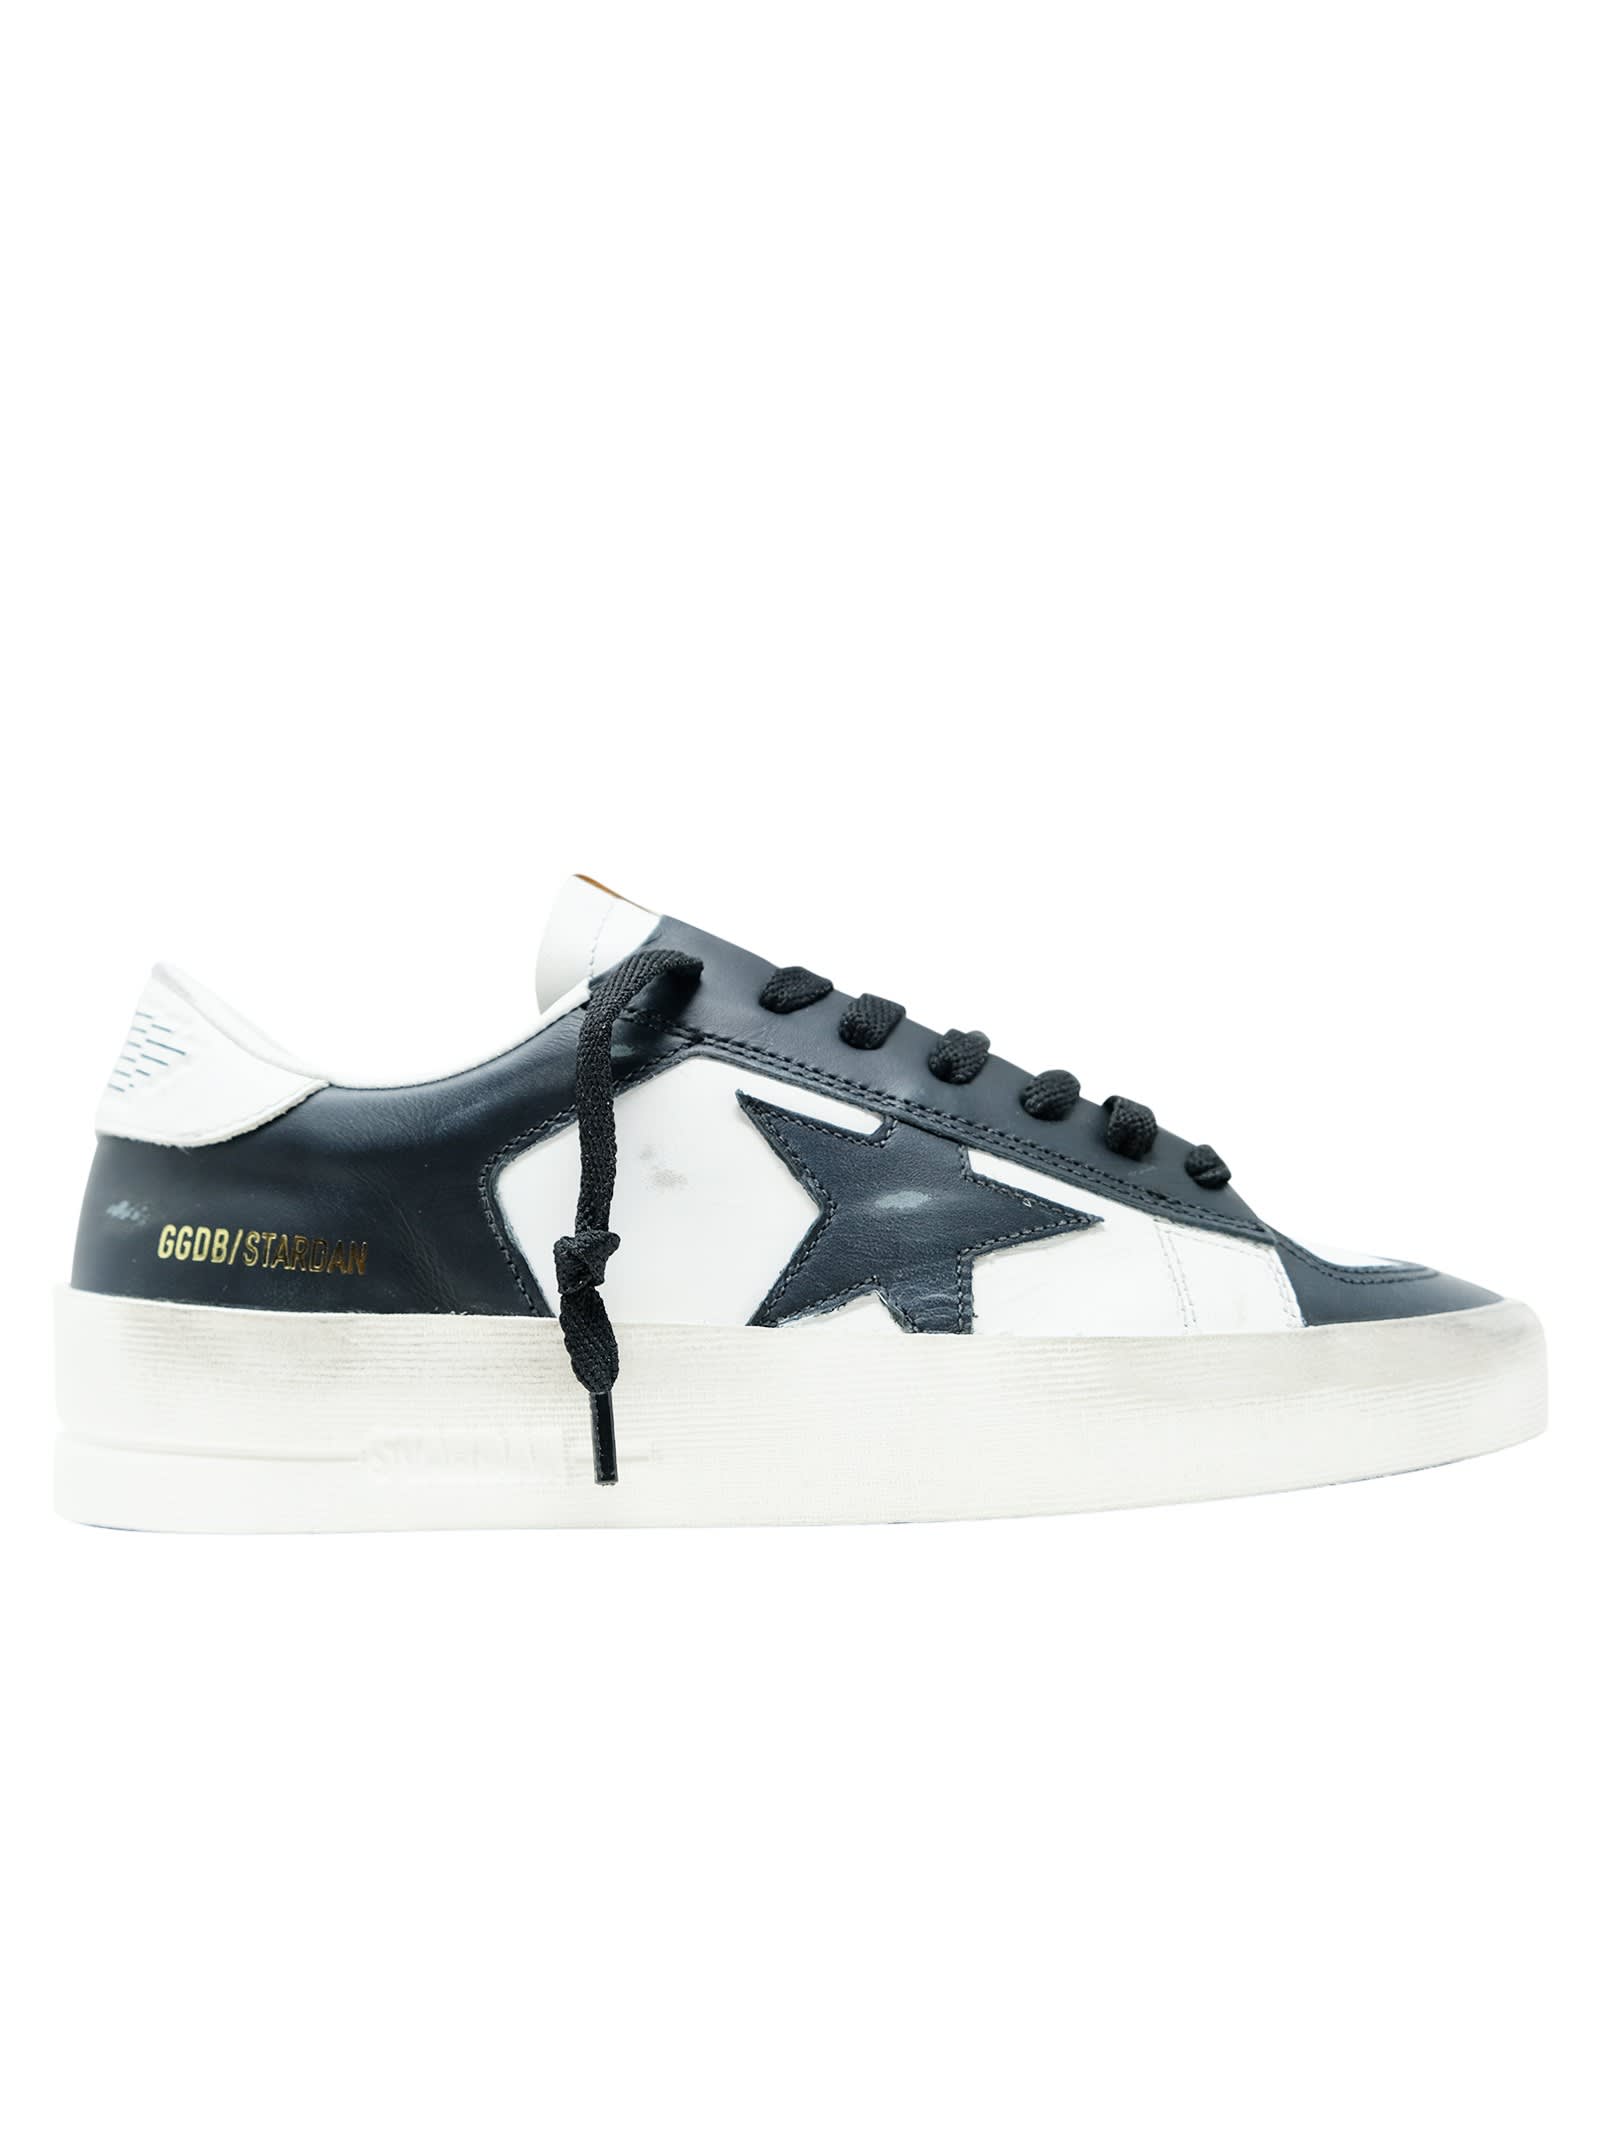 Golden Goose Black And White Leather Stardan Sneakers